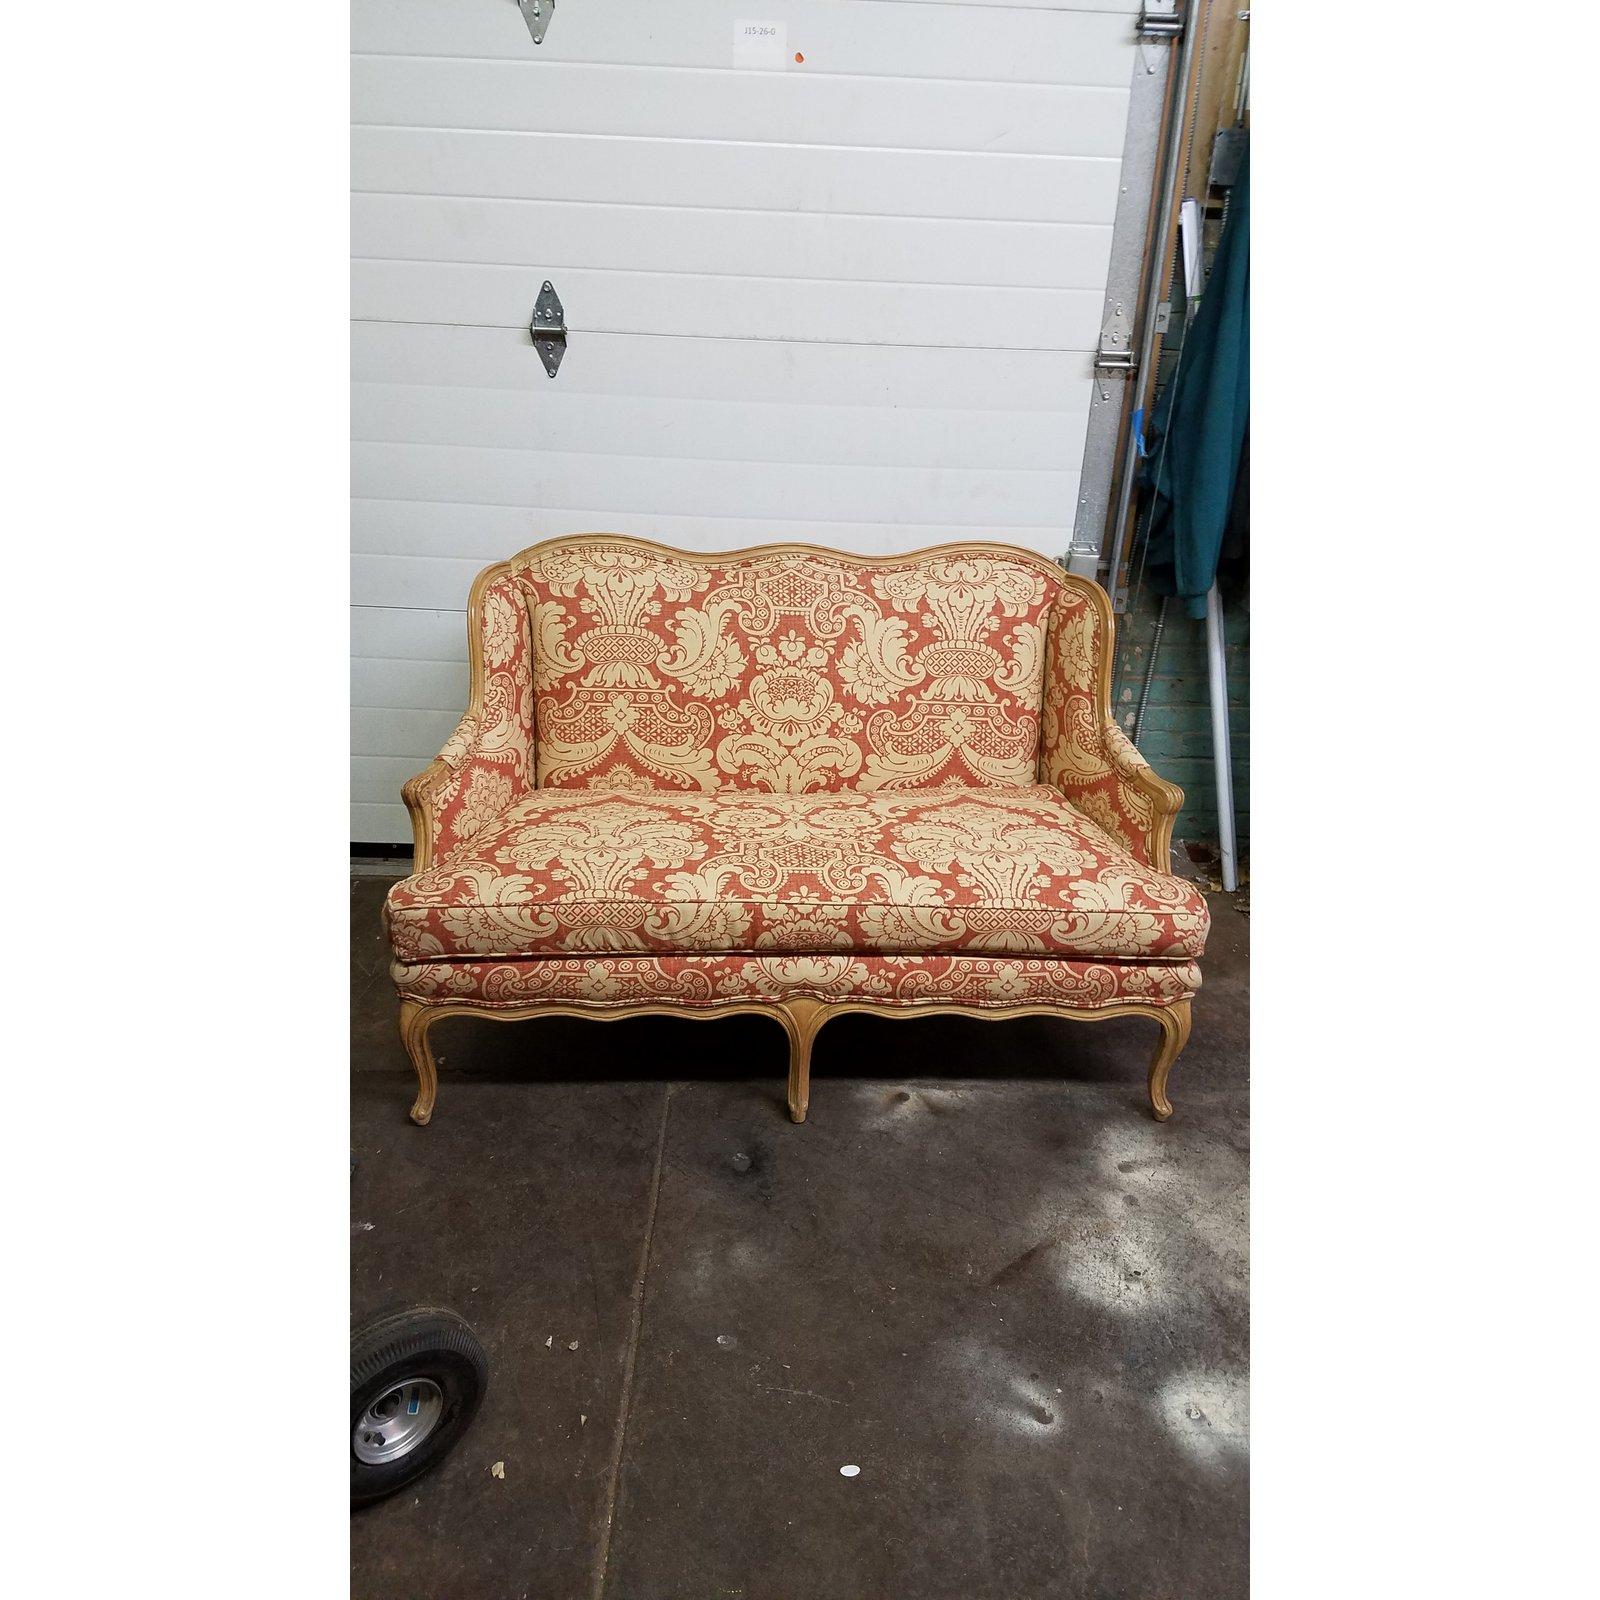 Great looking settee loveseat with new upholstery in ivory and burnt orange printed linen damask pattern with a light texture. The frame is a beautifully carved natural toned fruit wood. Henredon is know for quality 8 way hand tied construction with